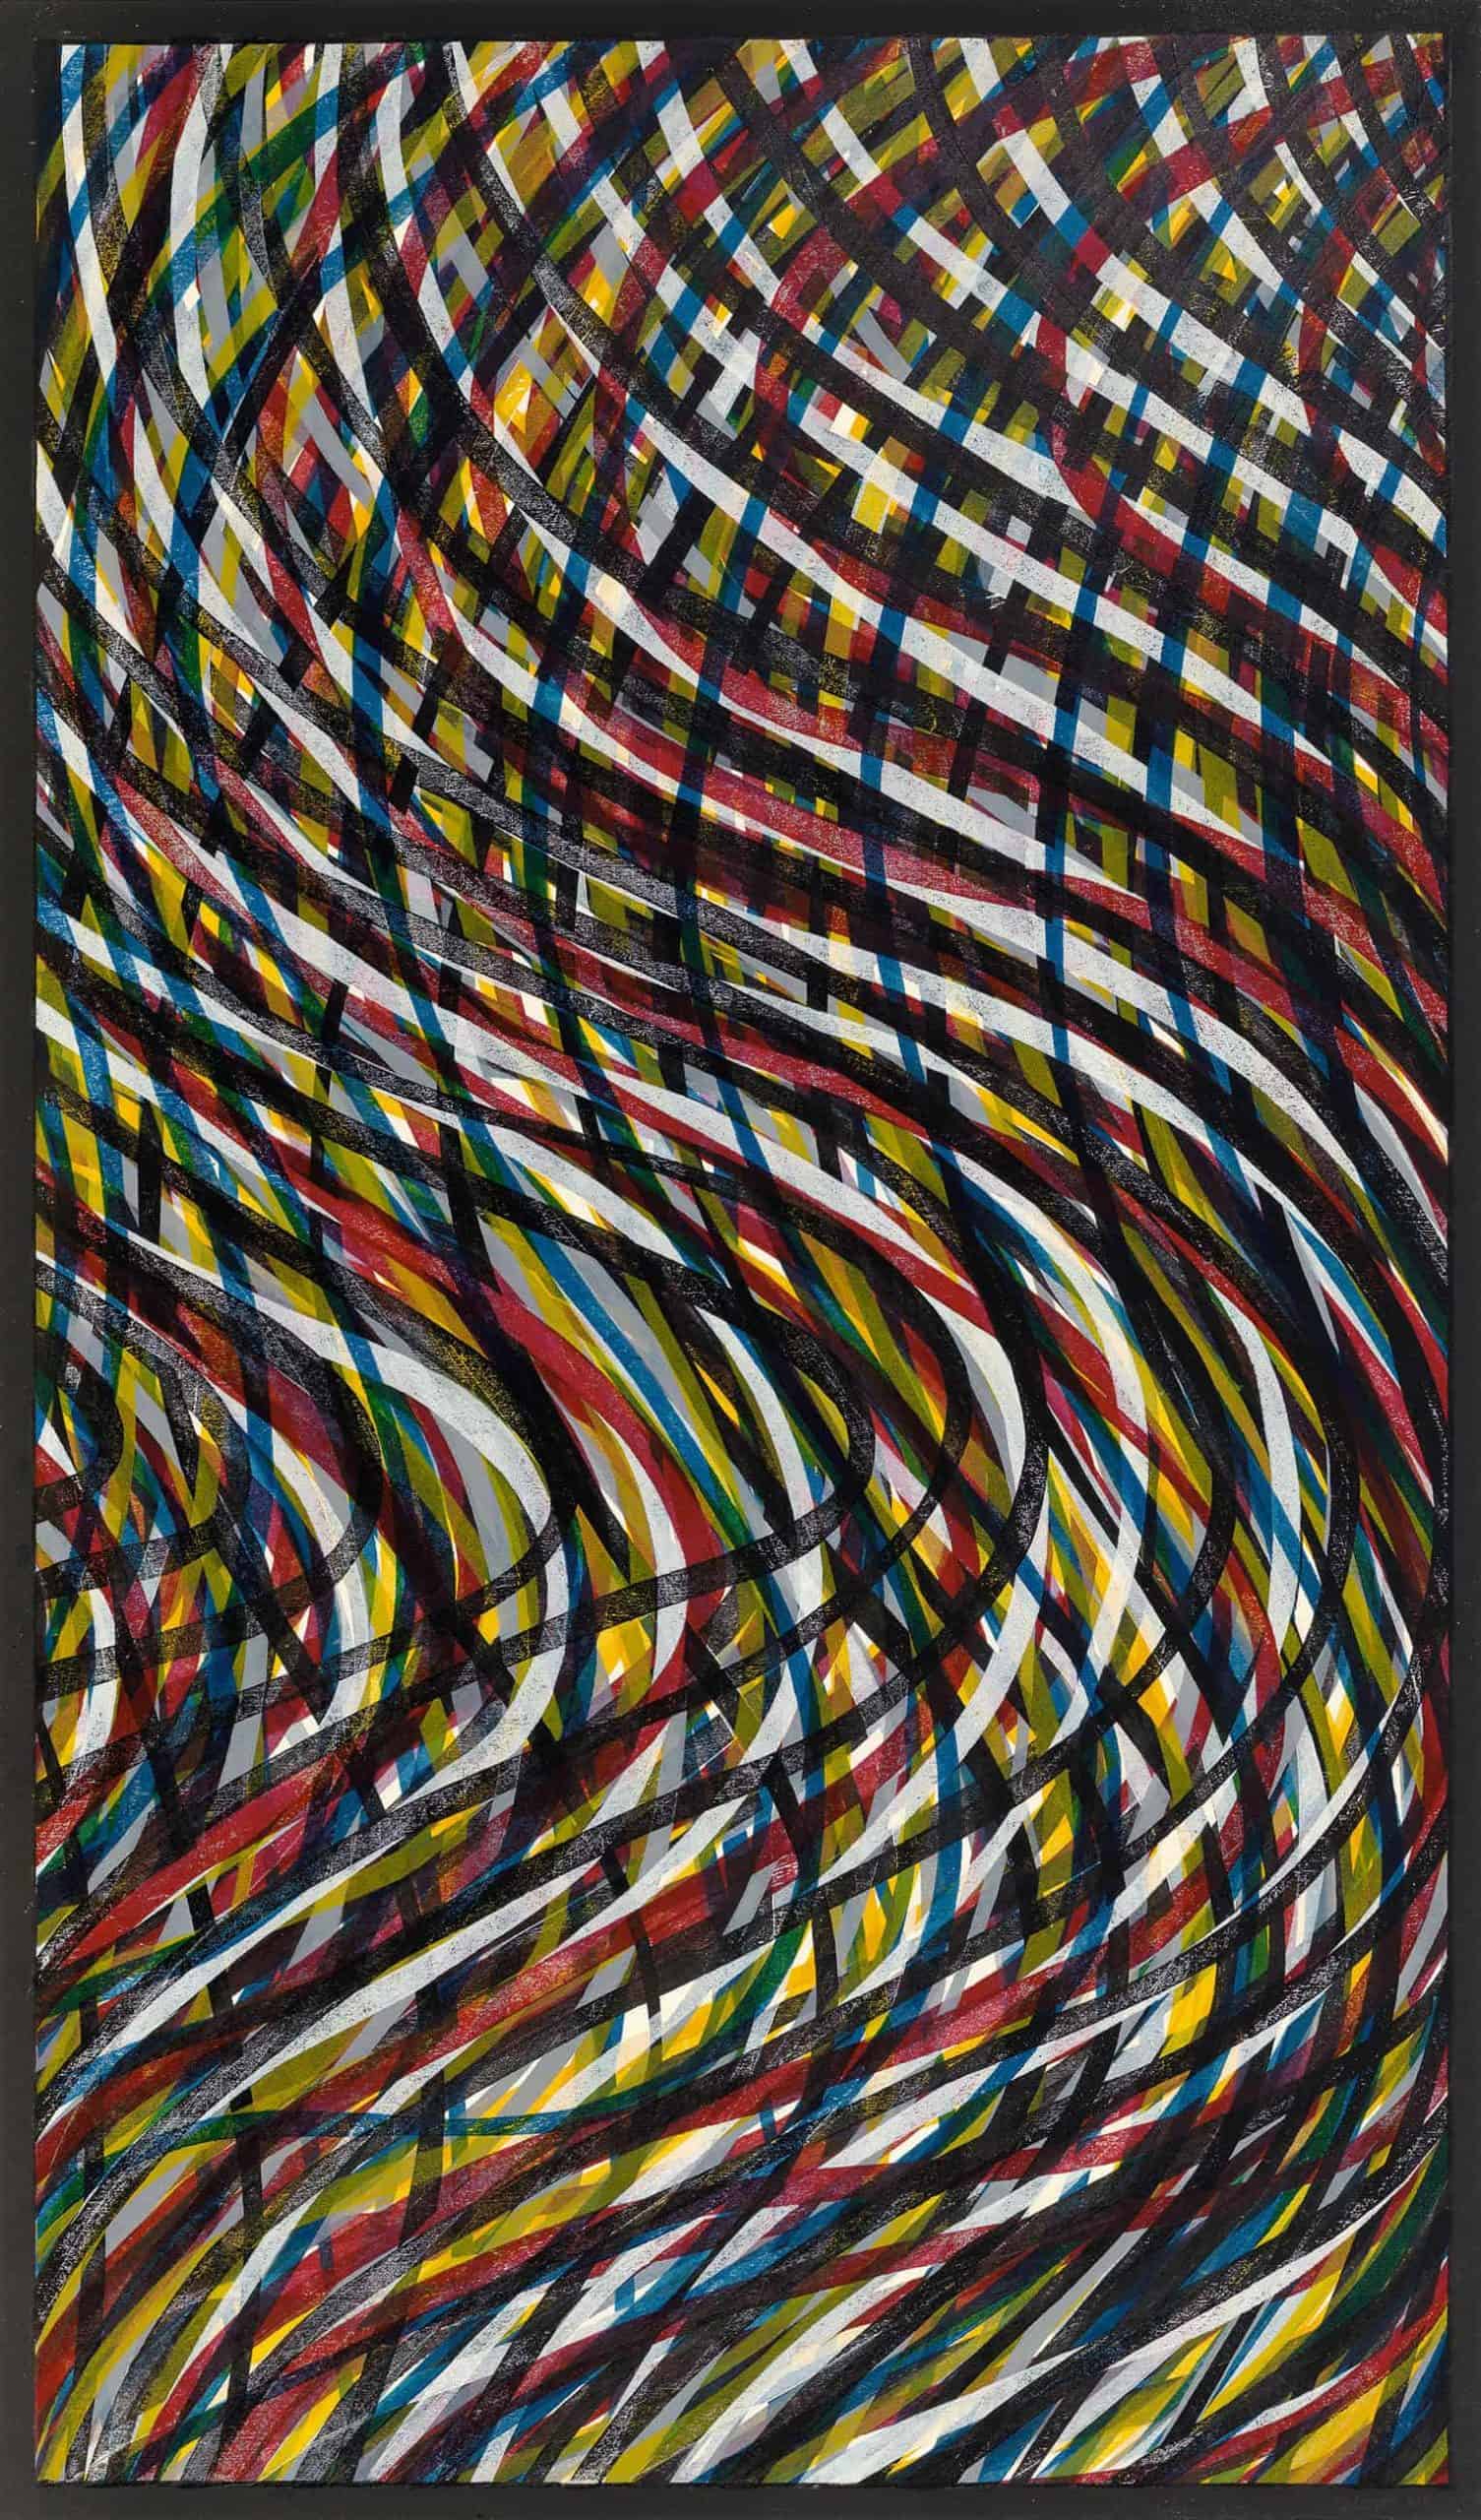 Curves of color form Wavy Brushstrokes Superimposed, one of Sol LeWitt's later prints, in Strict Beauty at the Williams College Museum of Art. Press image courtesy of WCMA.